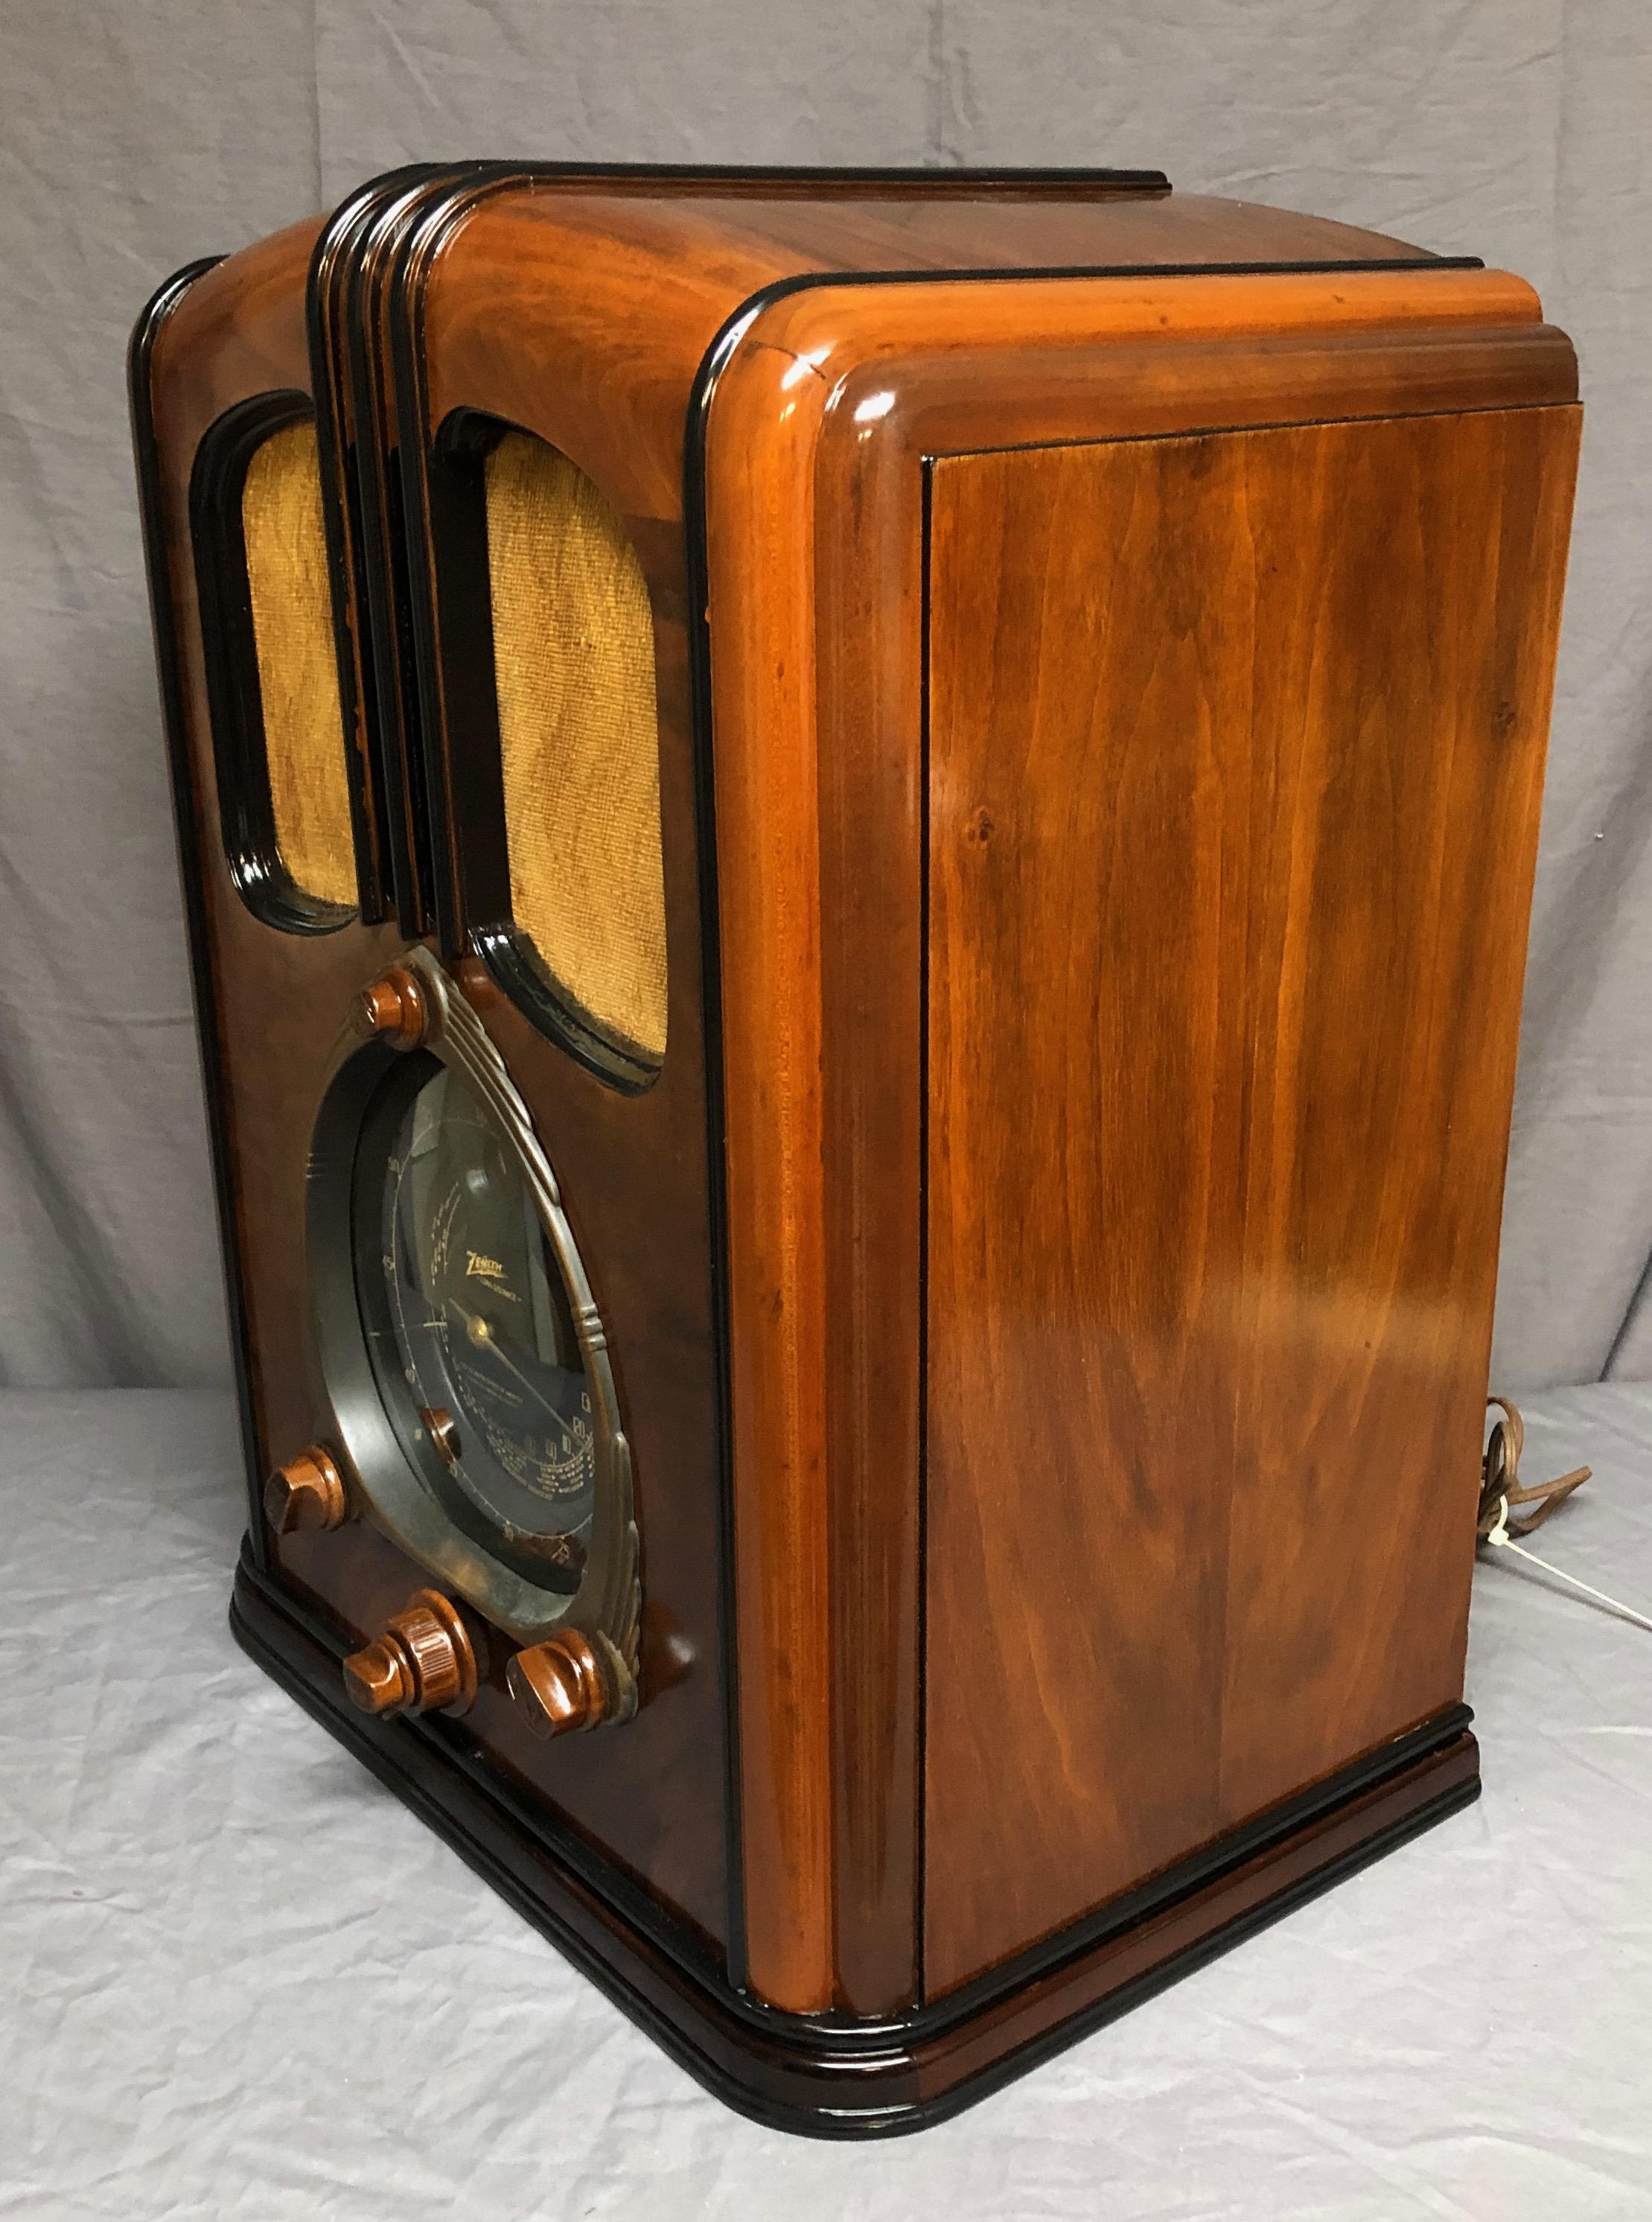 1938 Zenith “WALTON” 12-S-232 Shutter Dial Tombstone Art Deco Radio in pristine restored condition. The most sought after of all of these old radios and displayed on the popular television program “The Waltons”. This 12 tube Zenith is gorgeous!! The